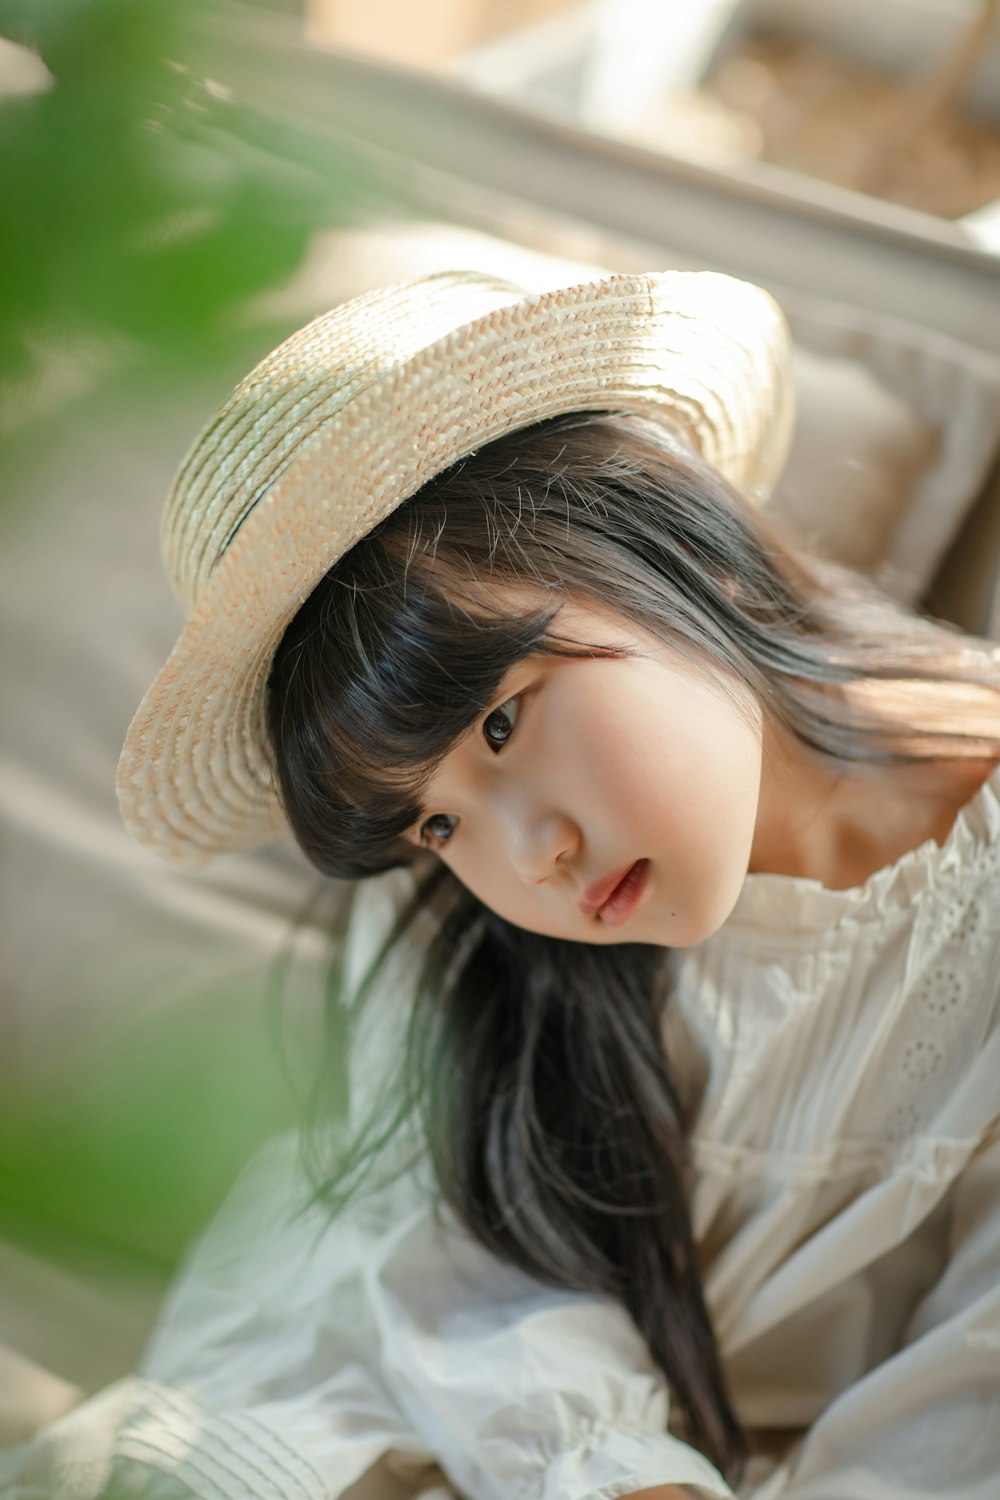 a young girl wearing a white dress and a straw hat